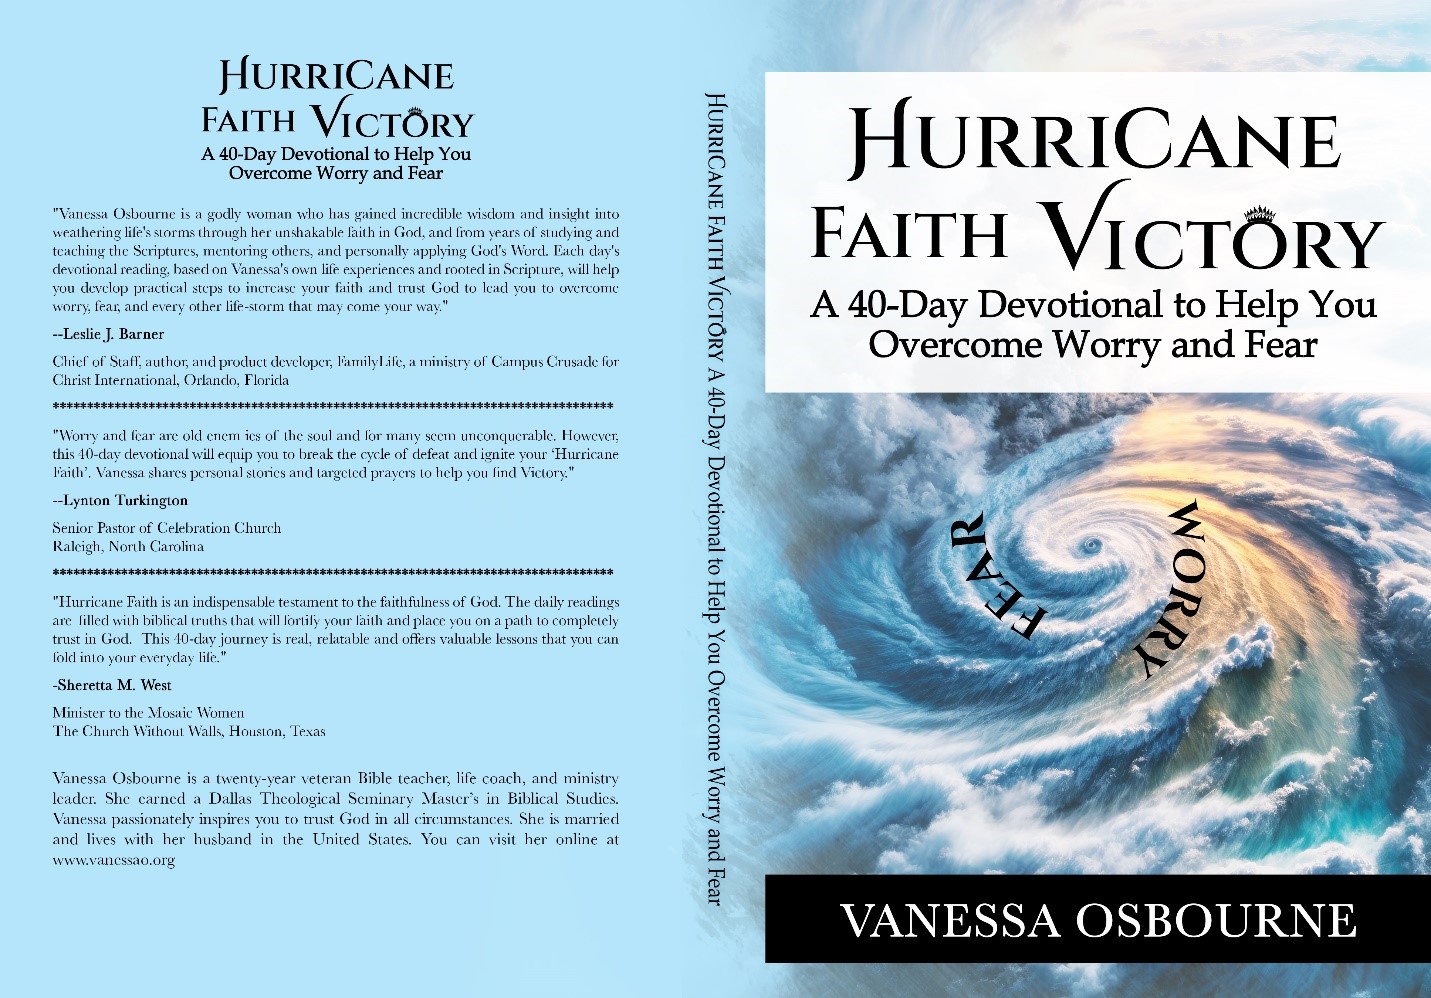 Transformational Journey: "Hurricane Faith Victory: A 40-Day Devotional to Help You Overcome Worry and Fear"